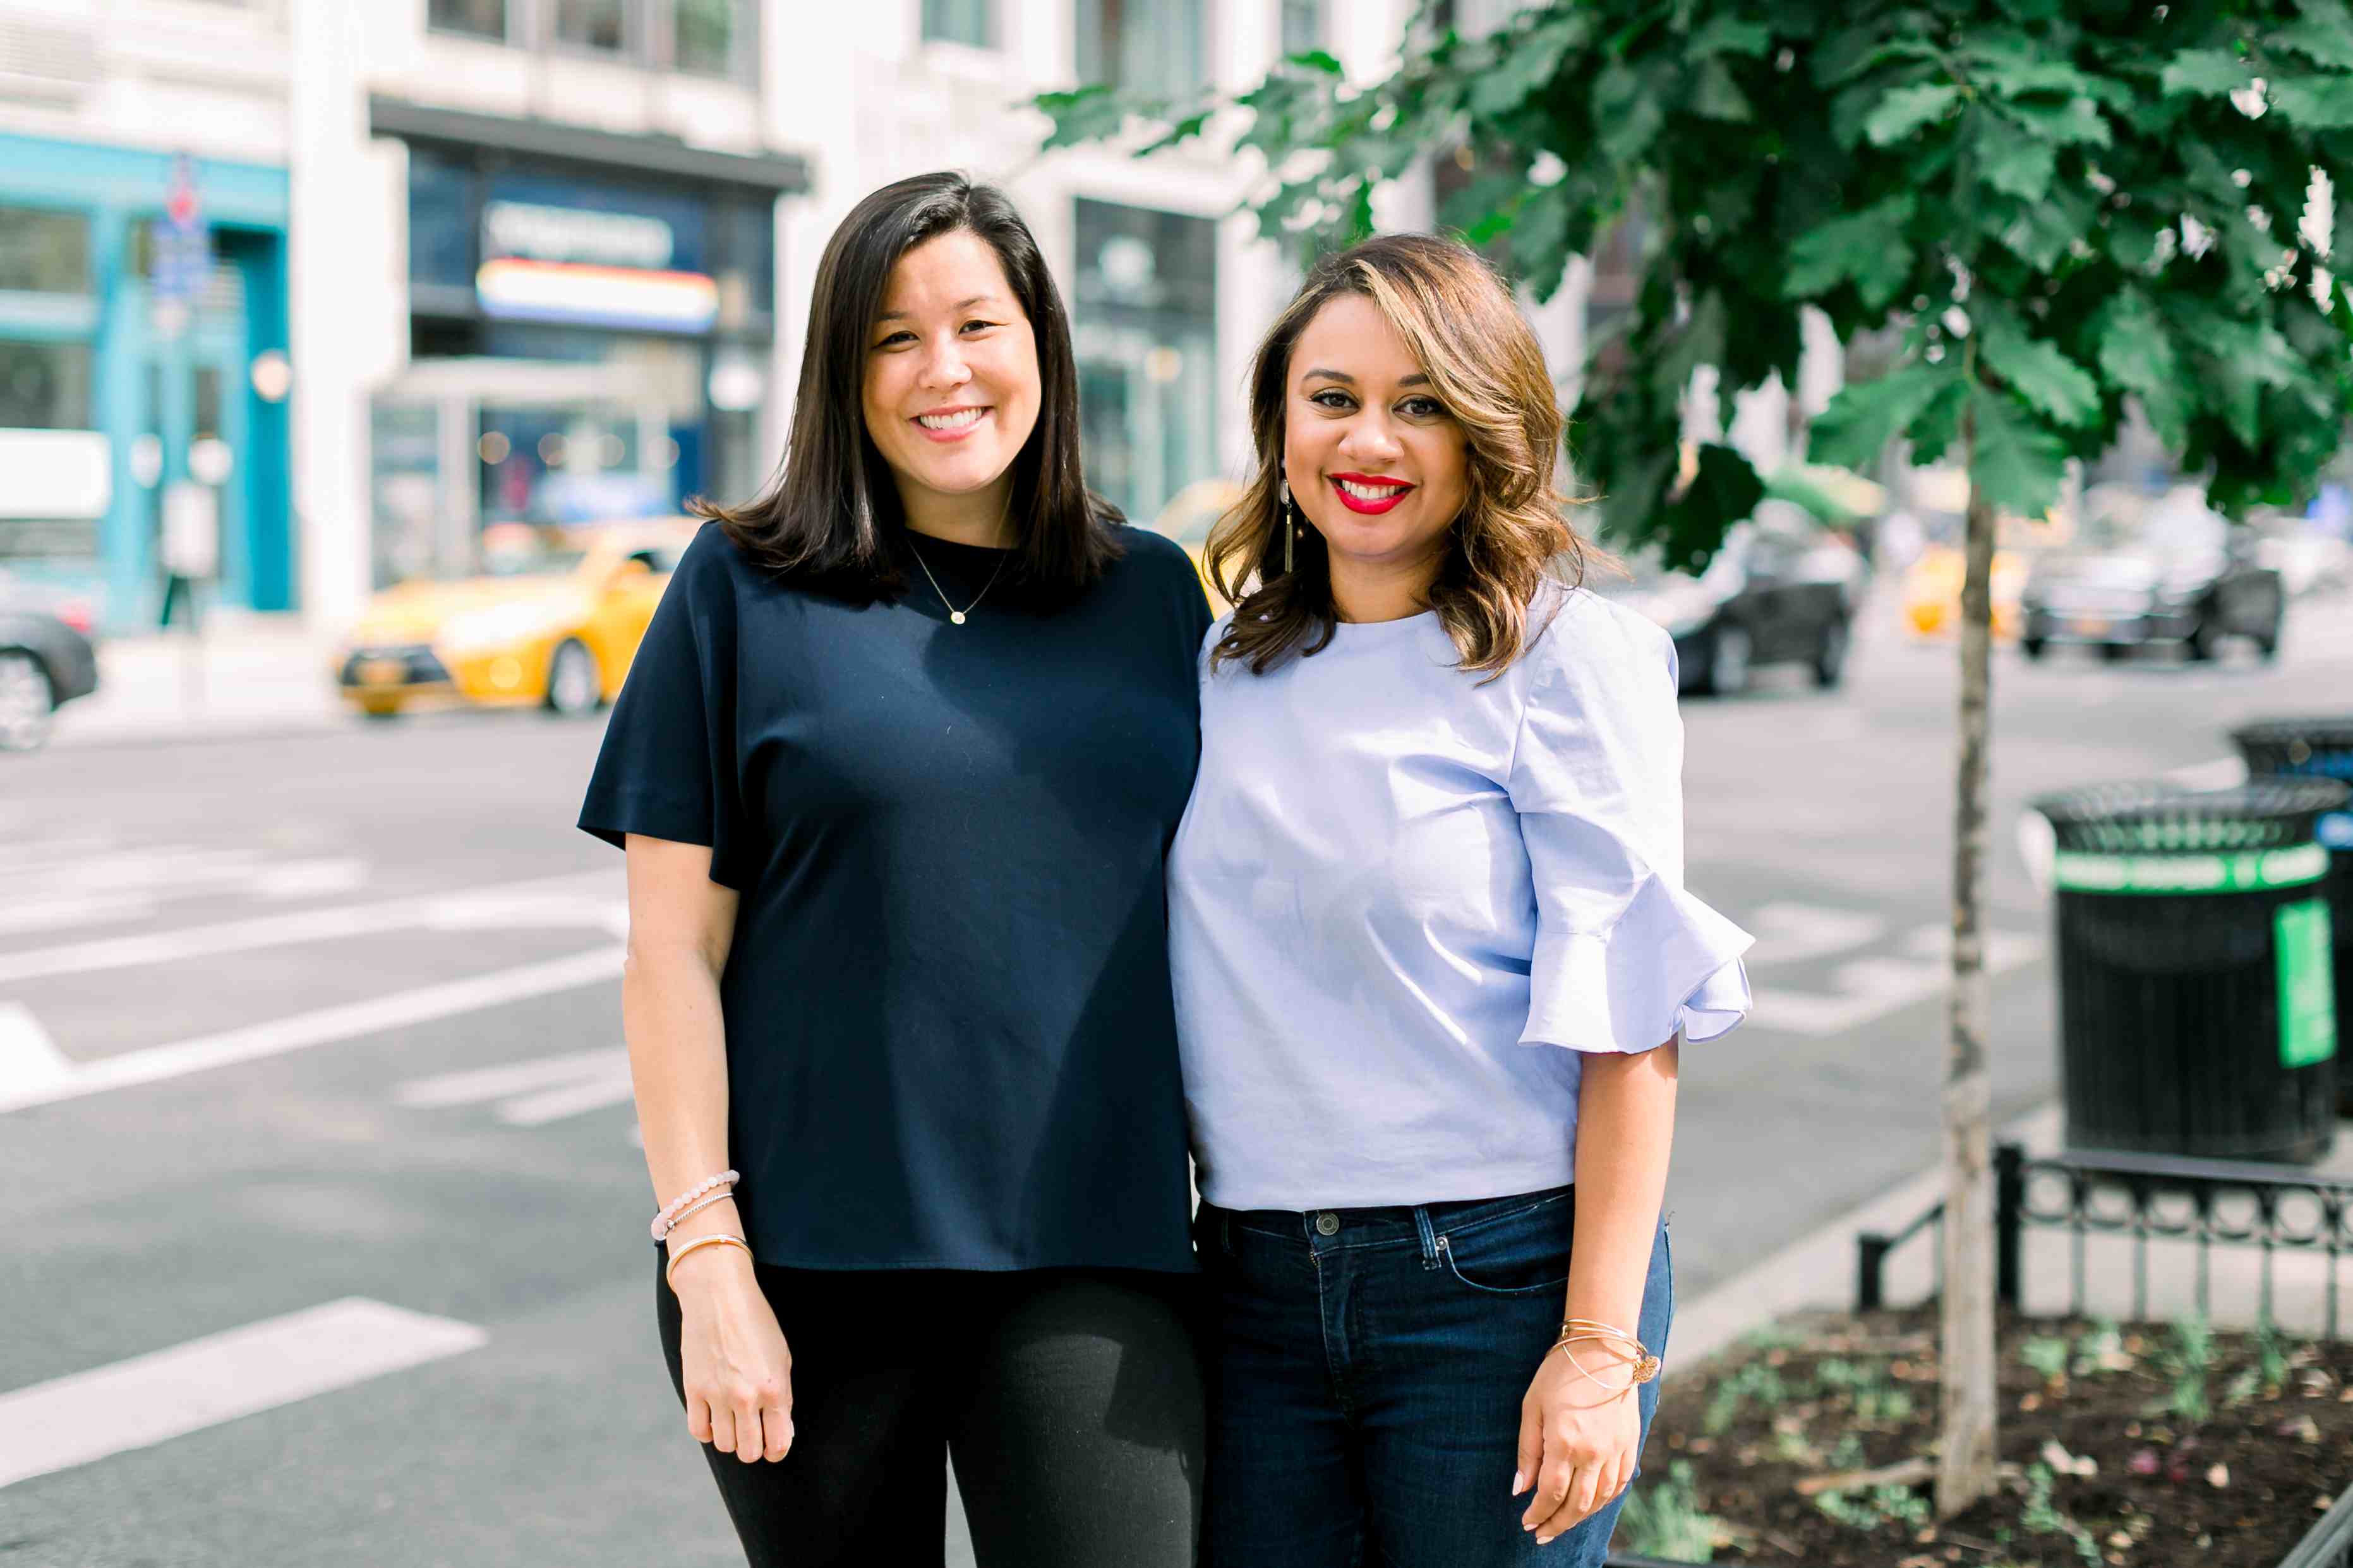 These Co-Founders Turned Frustration into a Diverse Community of People Practicing Self Care